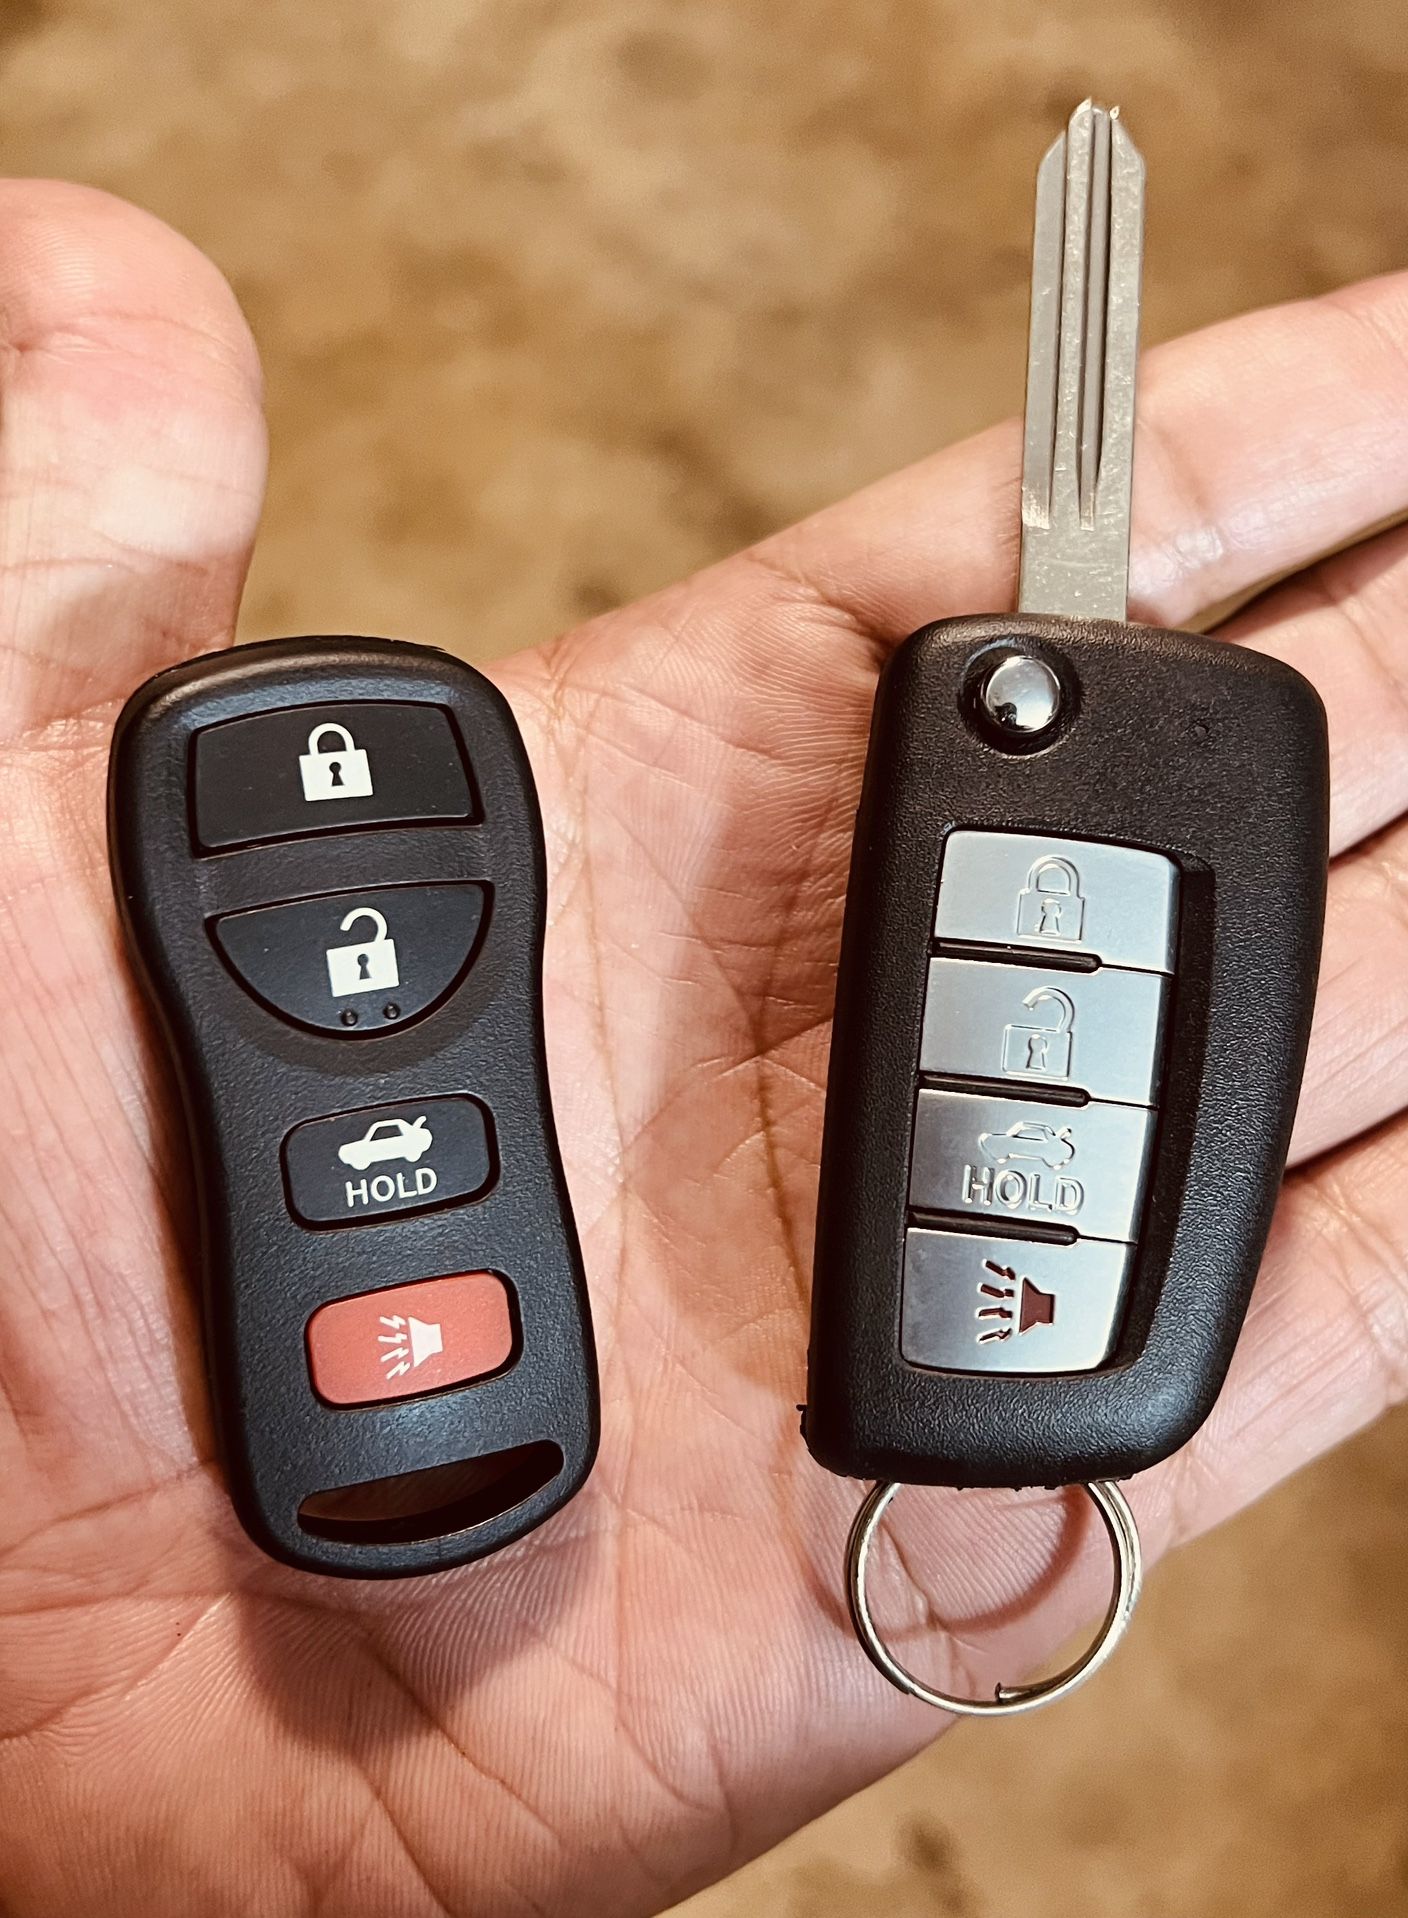 [Upgrade to Flip Key] Works For Nissan Or Infiniti If You Have The Remote from the Photos (Sentra, Altima, Maxima, G35, 350z, I35, Armada & more)